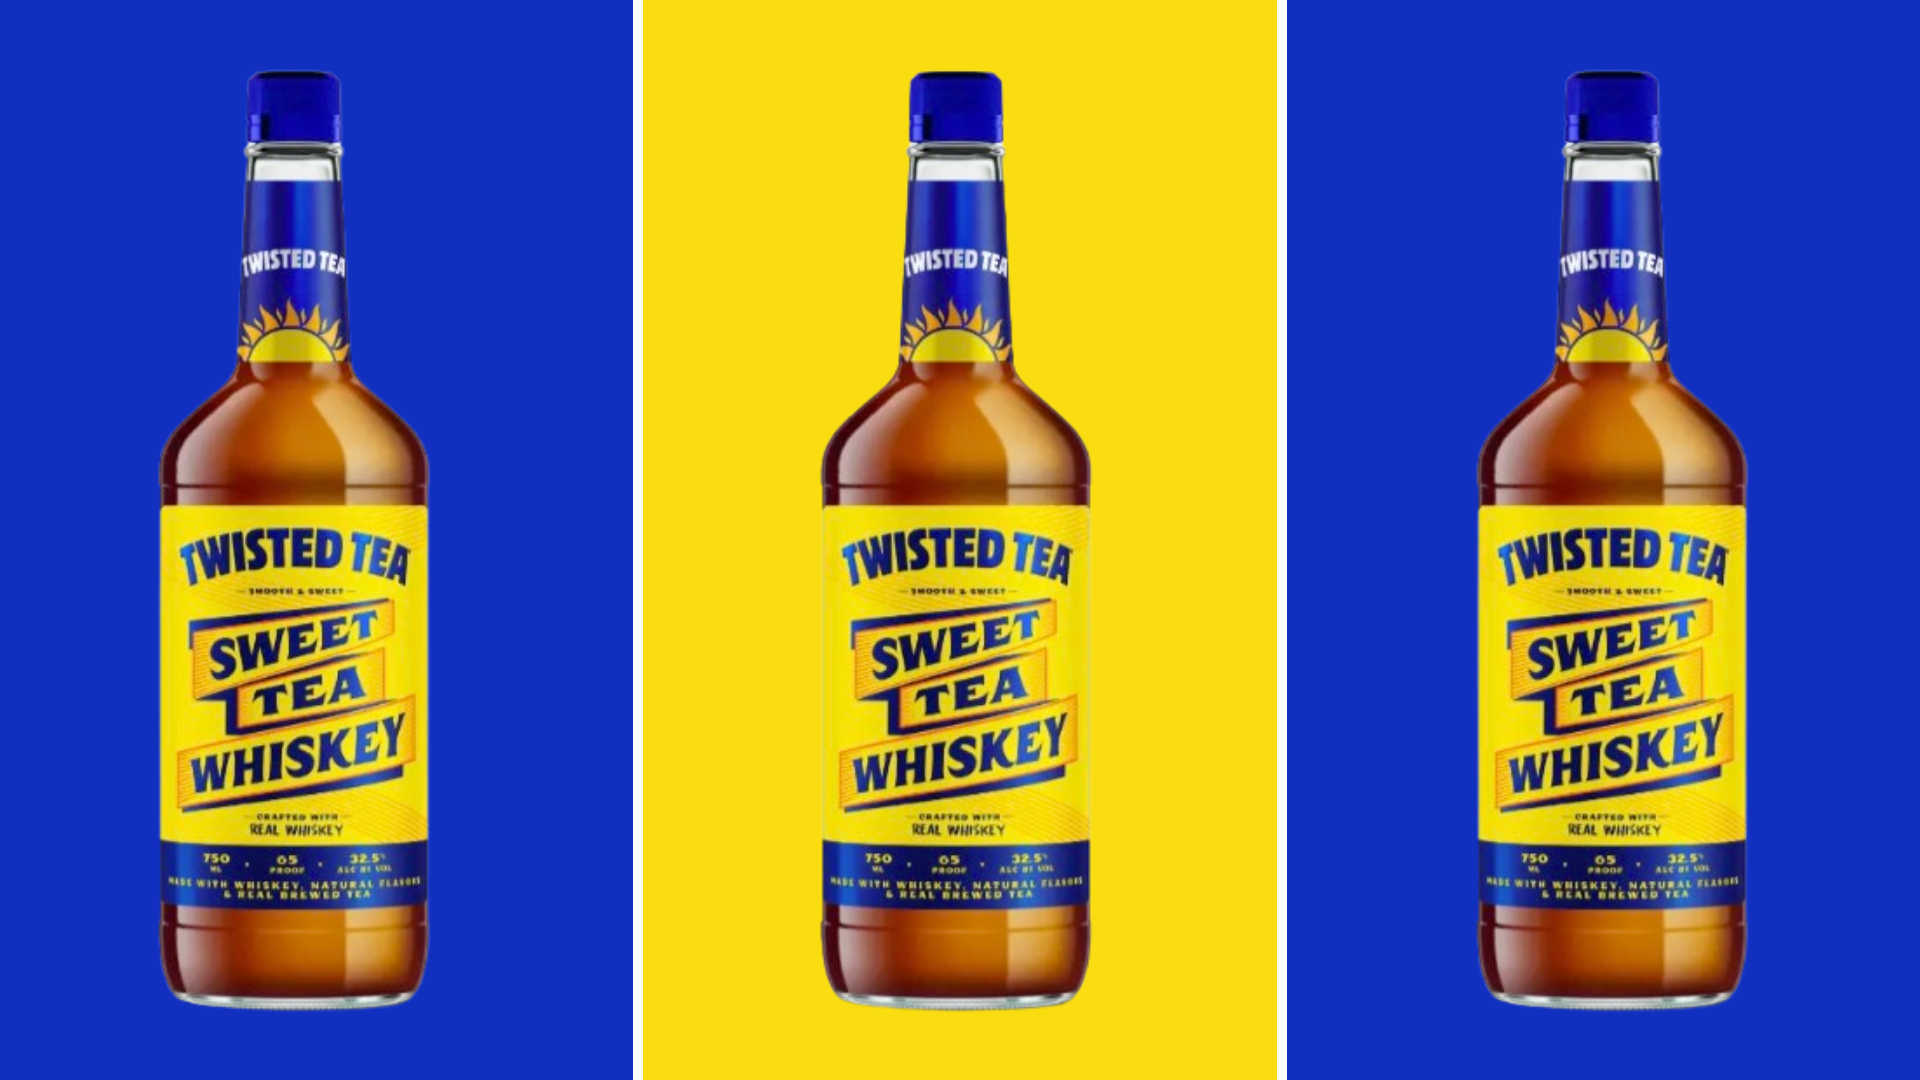 Three bottles of Twisted Tea Whiskey in blue and yellow background